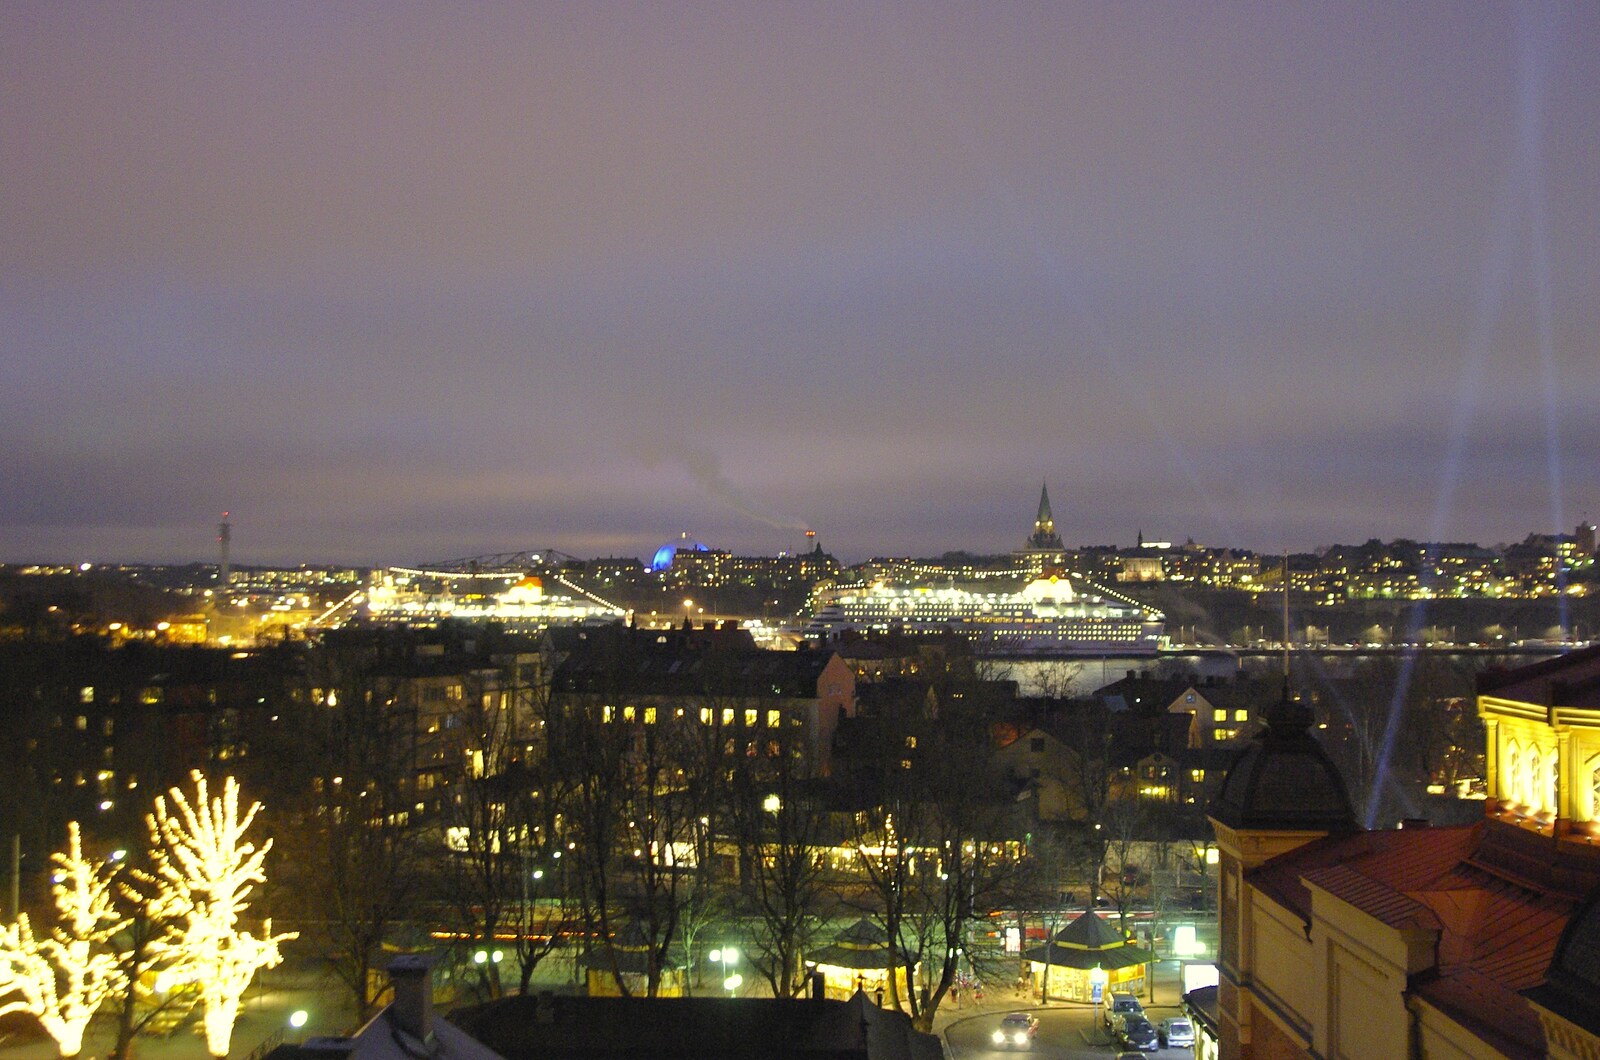 A night-time view over Stockholm from A Few Hours in Skansen, Stockholm, Sweden - 17th December 2007